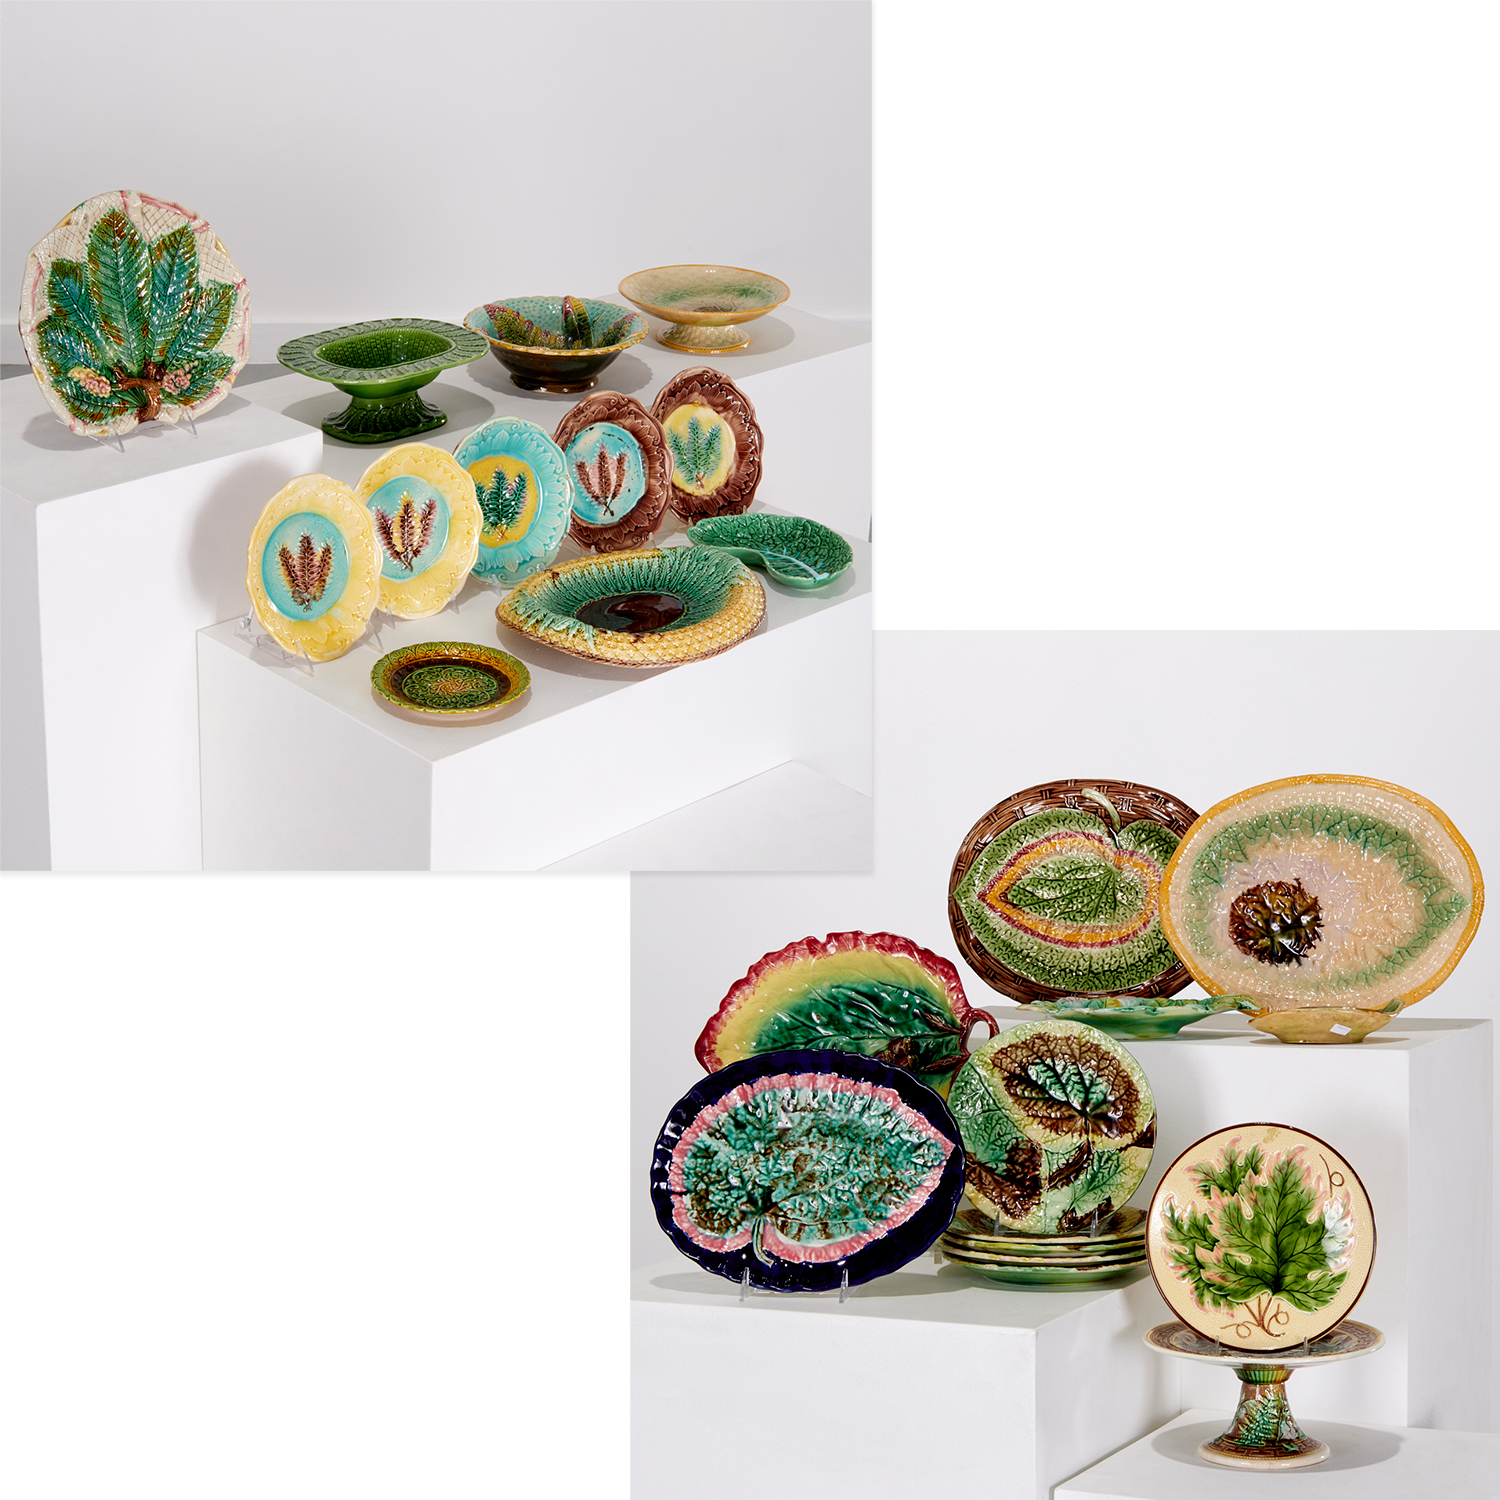 GROUP MAJOLICA LEAF SERVING PIECES 3ce658